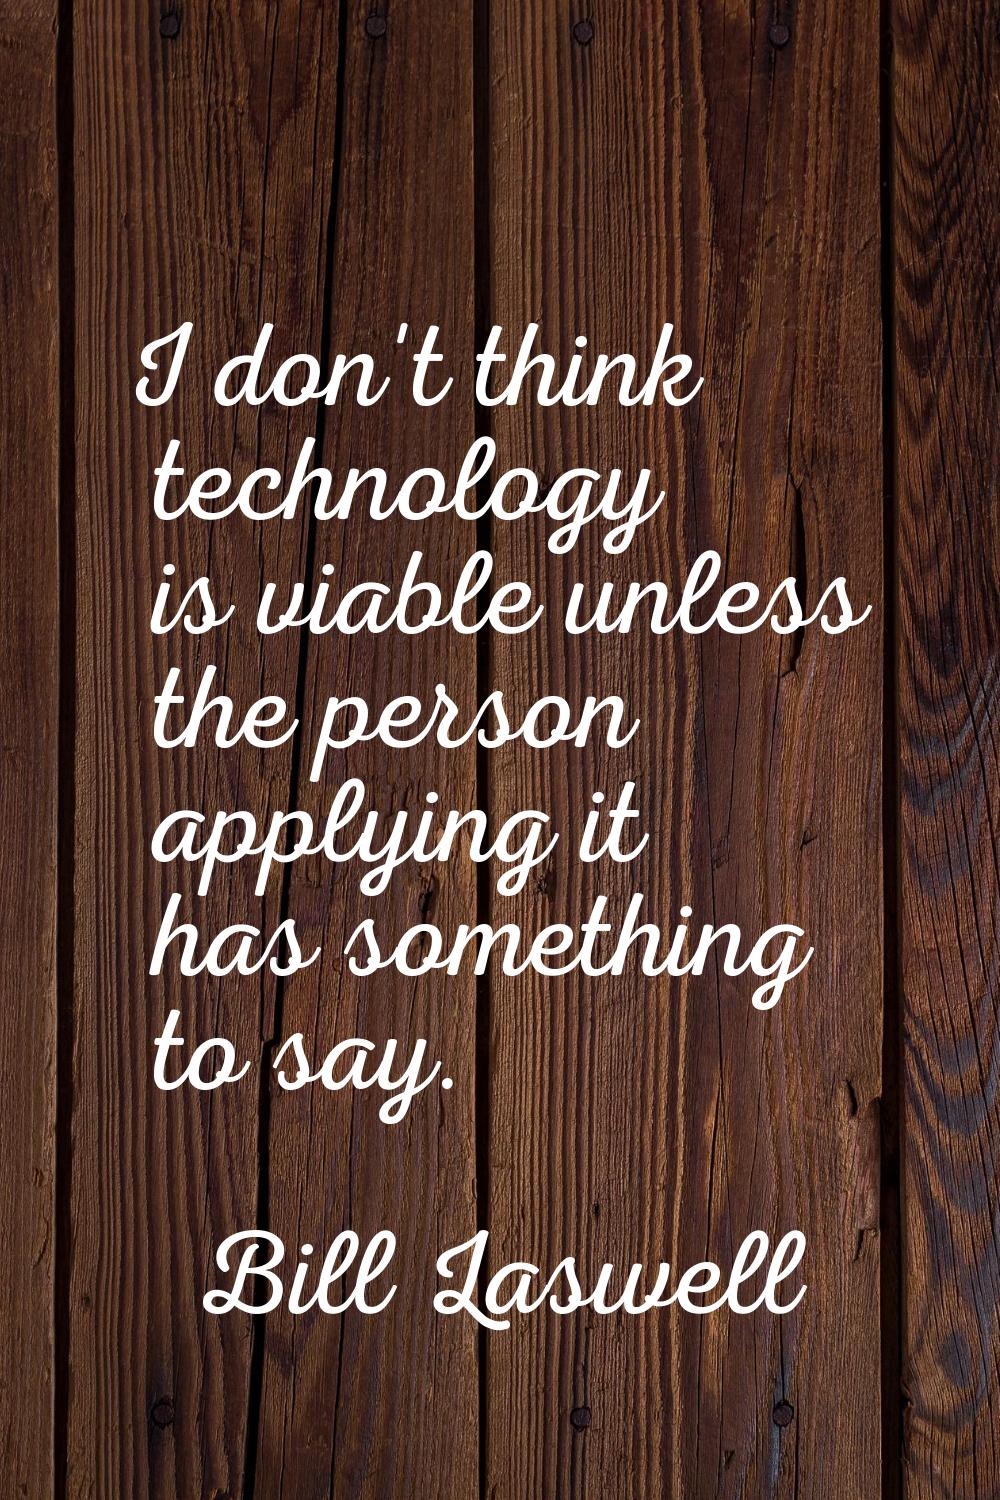 I don't think technology is viable unless the person applying it has something to say.